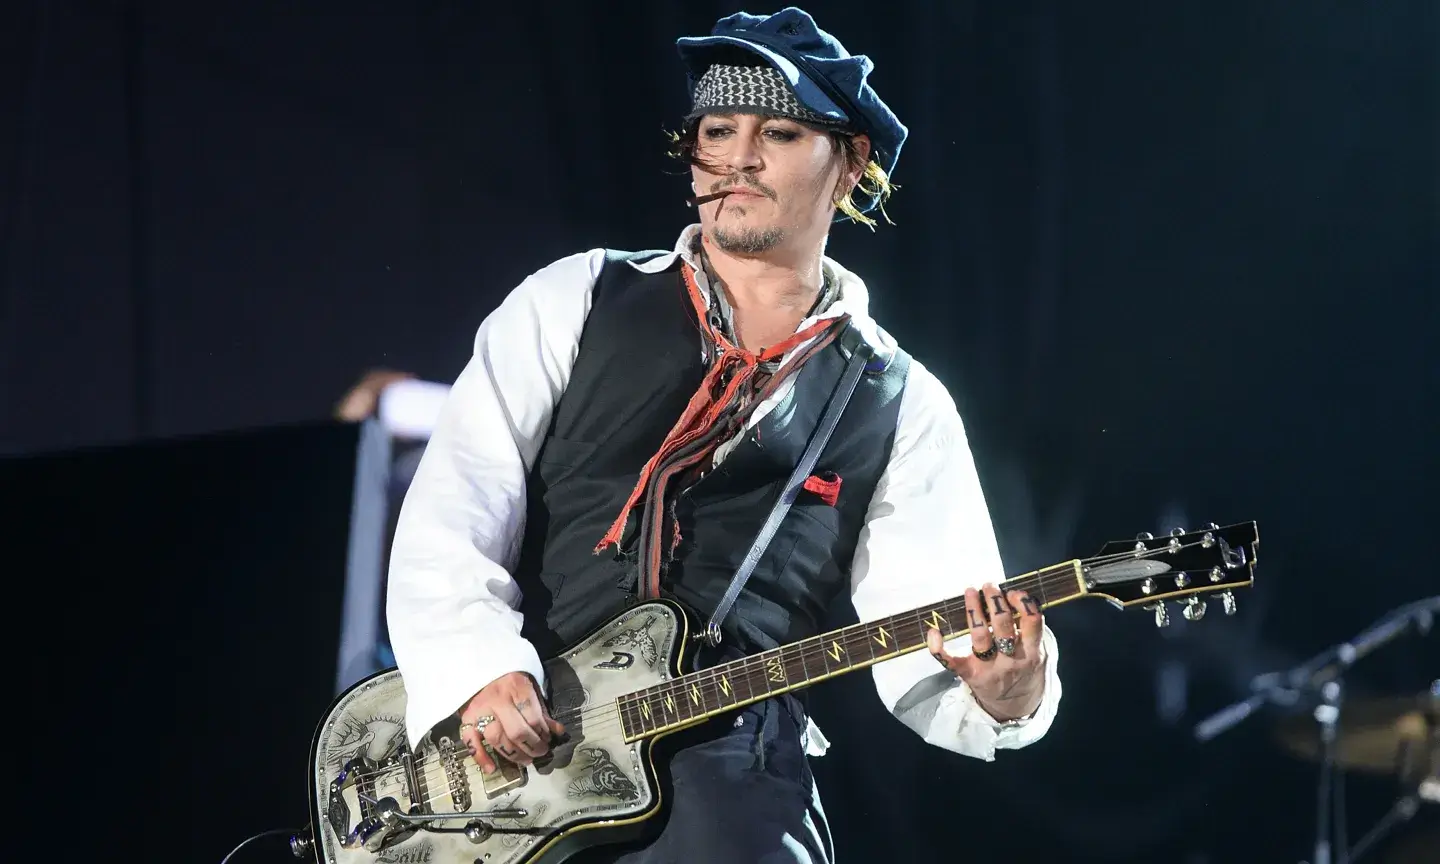 The Pirates of the Caribbean star talks about his music career 